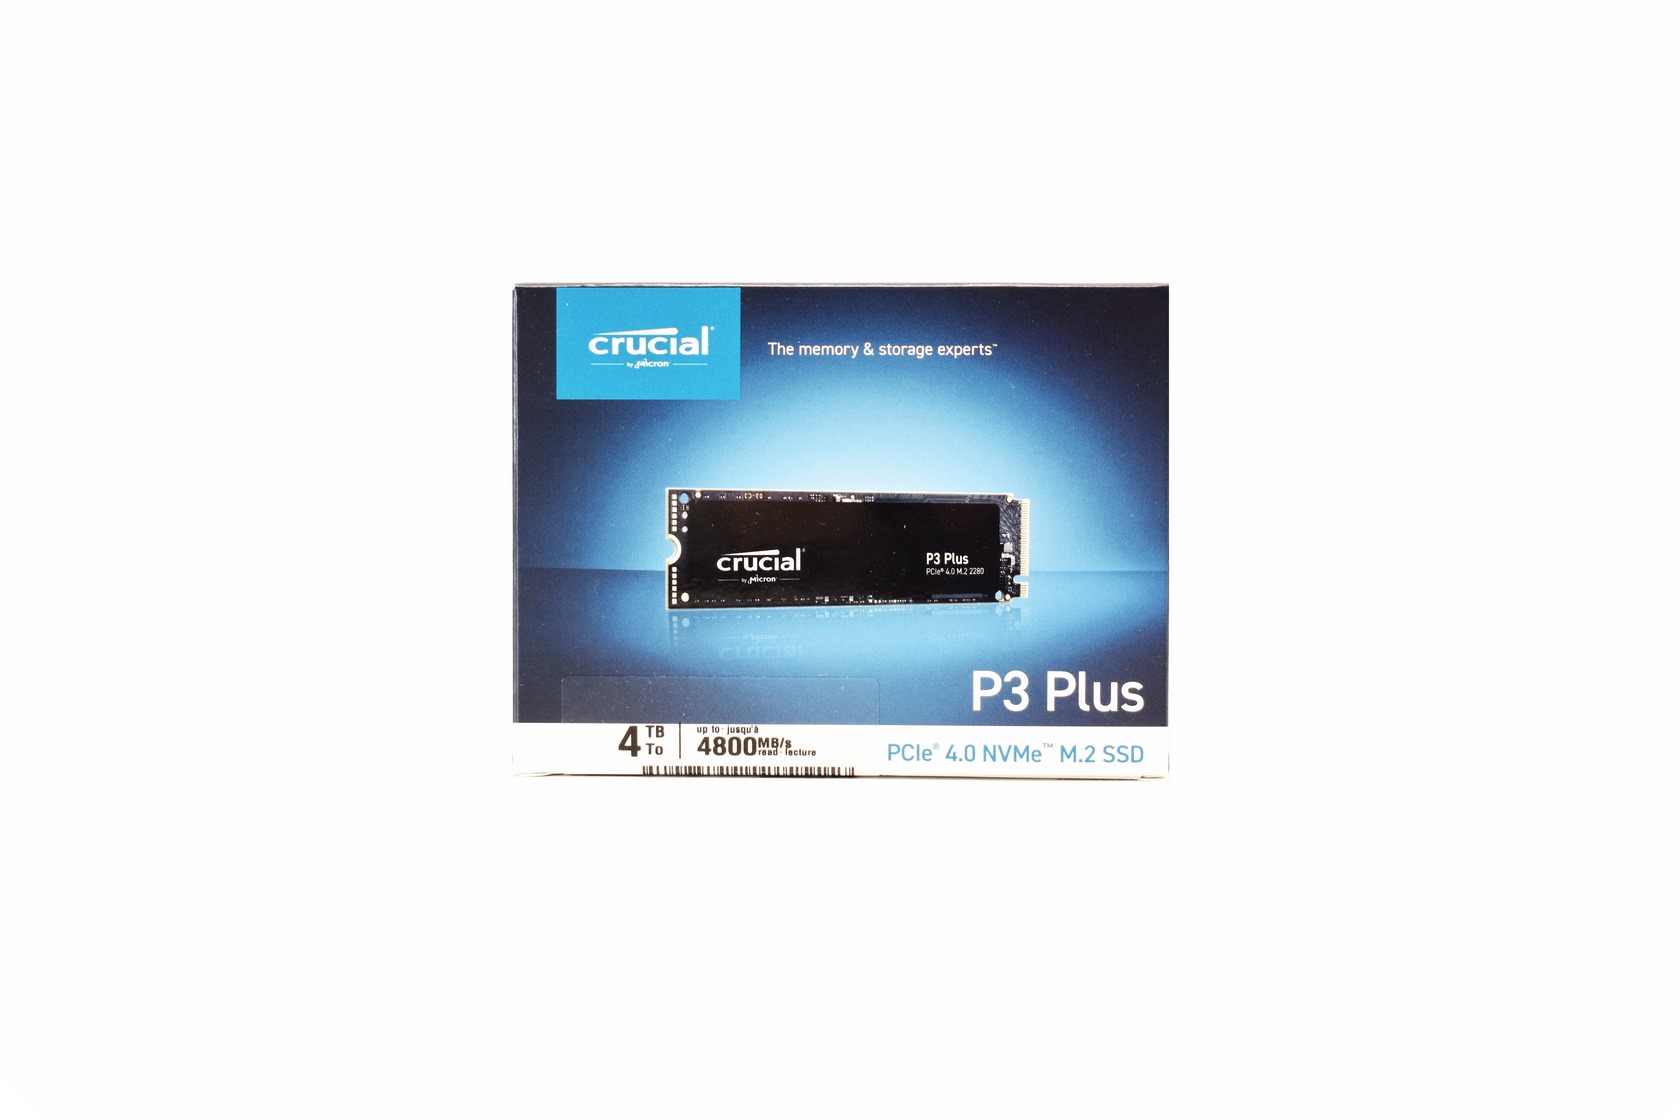 Crucial P3 Plus 4TB m.2 SSD - A Godsend for your Laptop 